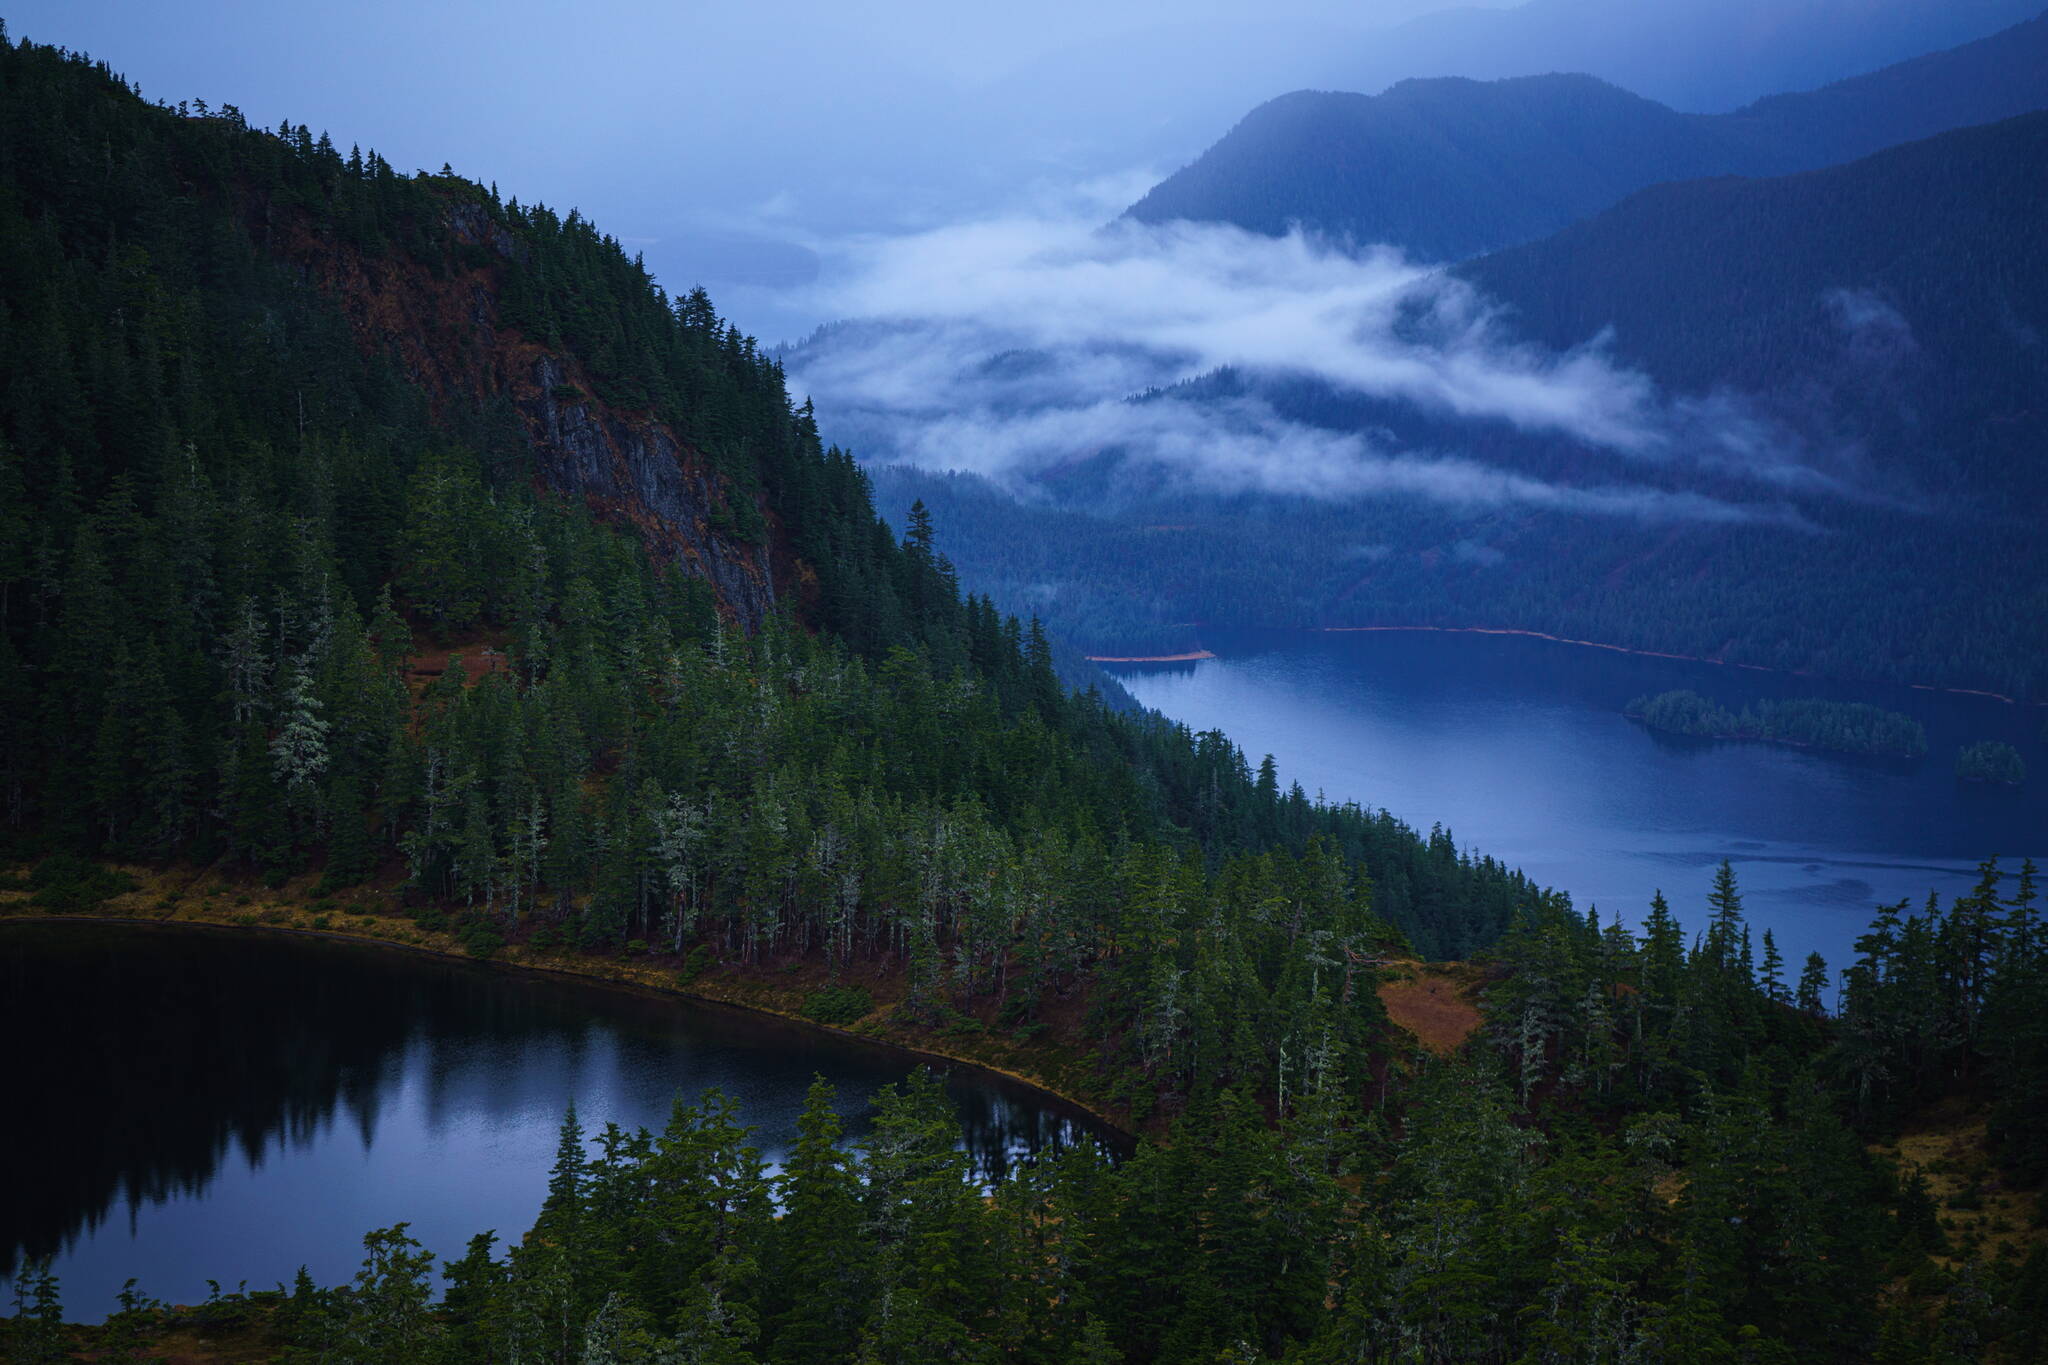 The Tongass National Forest includes 16.7 million acres and was established in 1907. The islands, forests, salmon streams, mountains and coastlines of Southeast Alaska are the ancestral lands of the Tlingit, Haida and Tsimshian people who continue to depend on and care for their traditional territories. The Tongass was not created with the consent of Alaska Native people and today, the U.S. Forest Service is working to improve government-to-government relations with the federally recognized tribal governments of Southeast Alaska. (Bethany Goodrich / Sustainable Southeast Partnership)